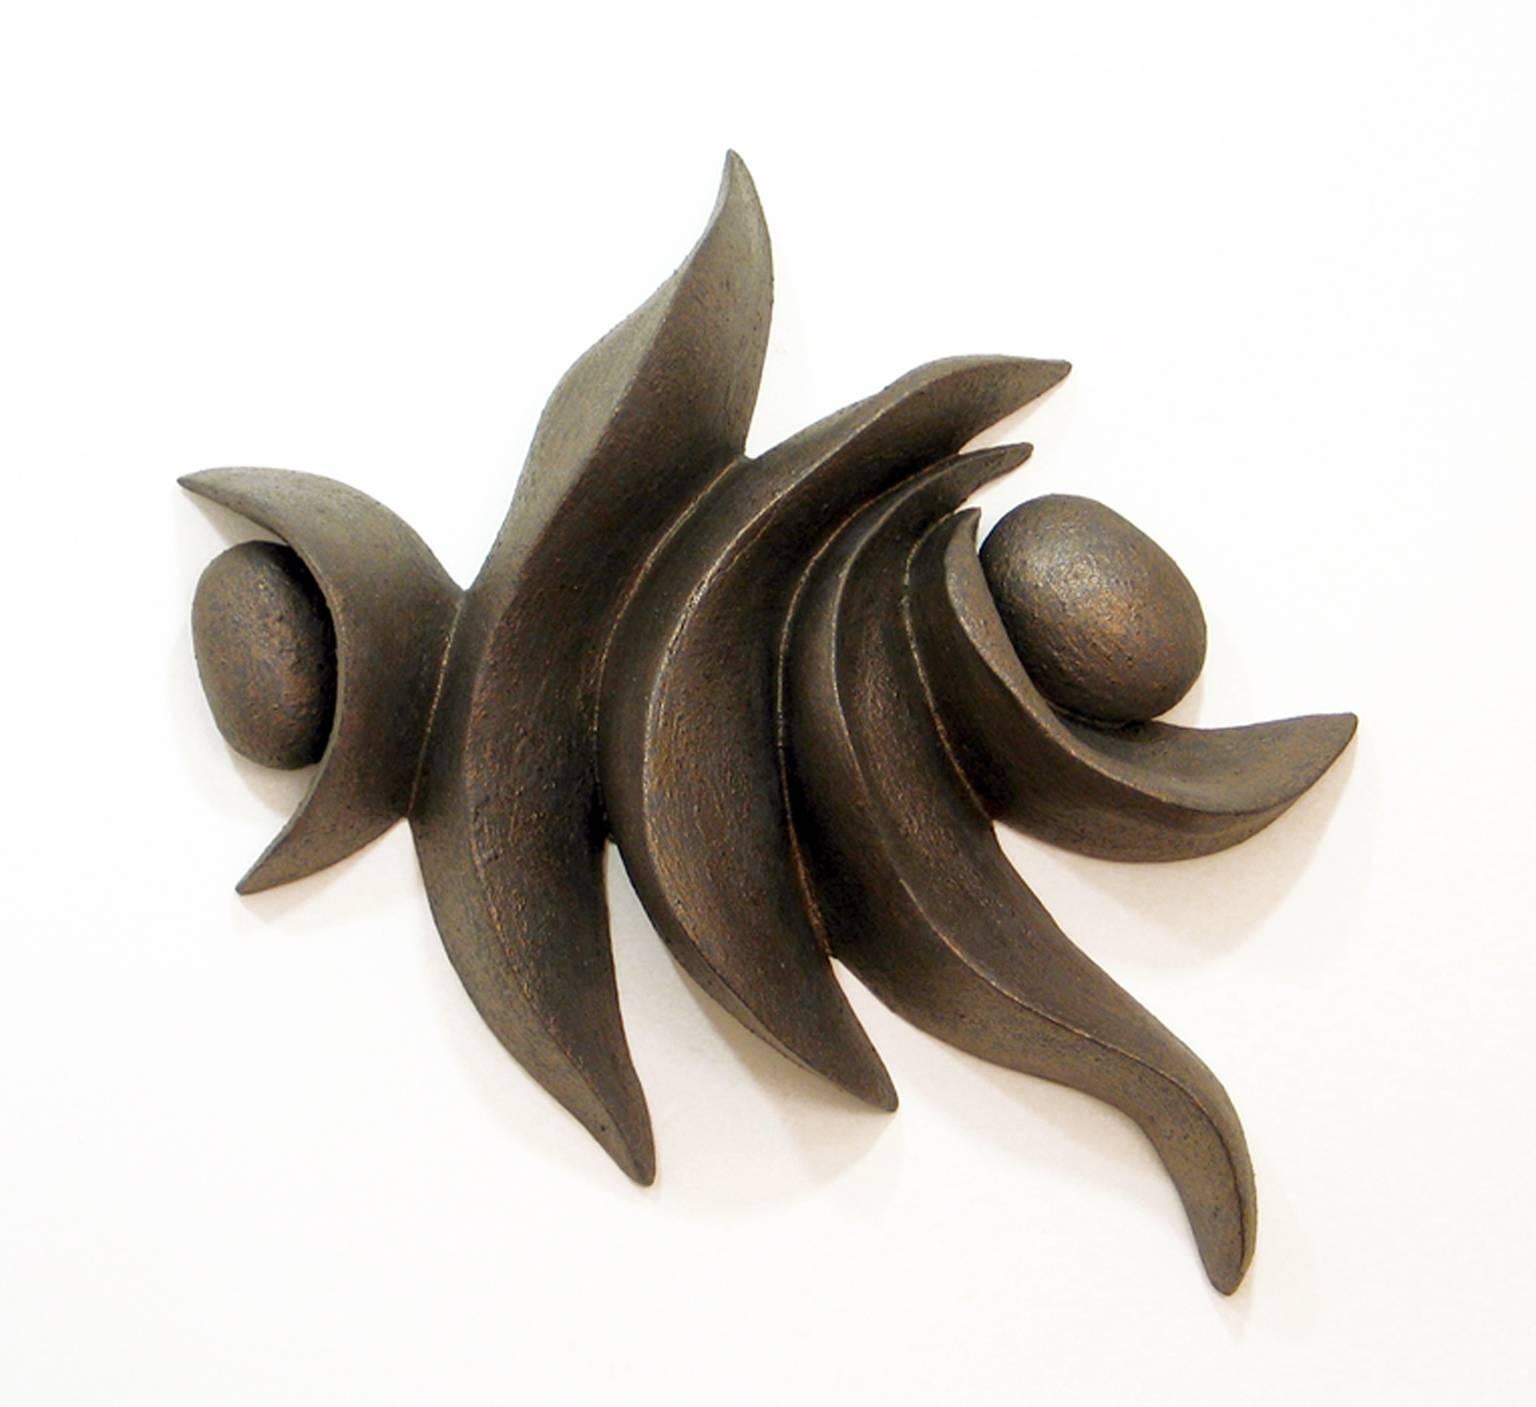 “Against the Others”, ceramic wall forms glazed in dark metallic gold - Sculpture by Elaine Lorenz